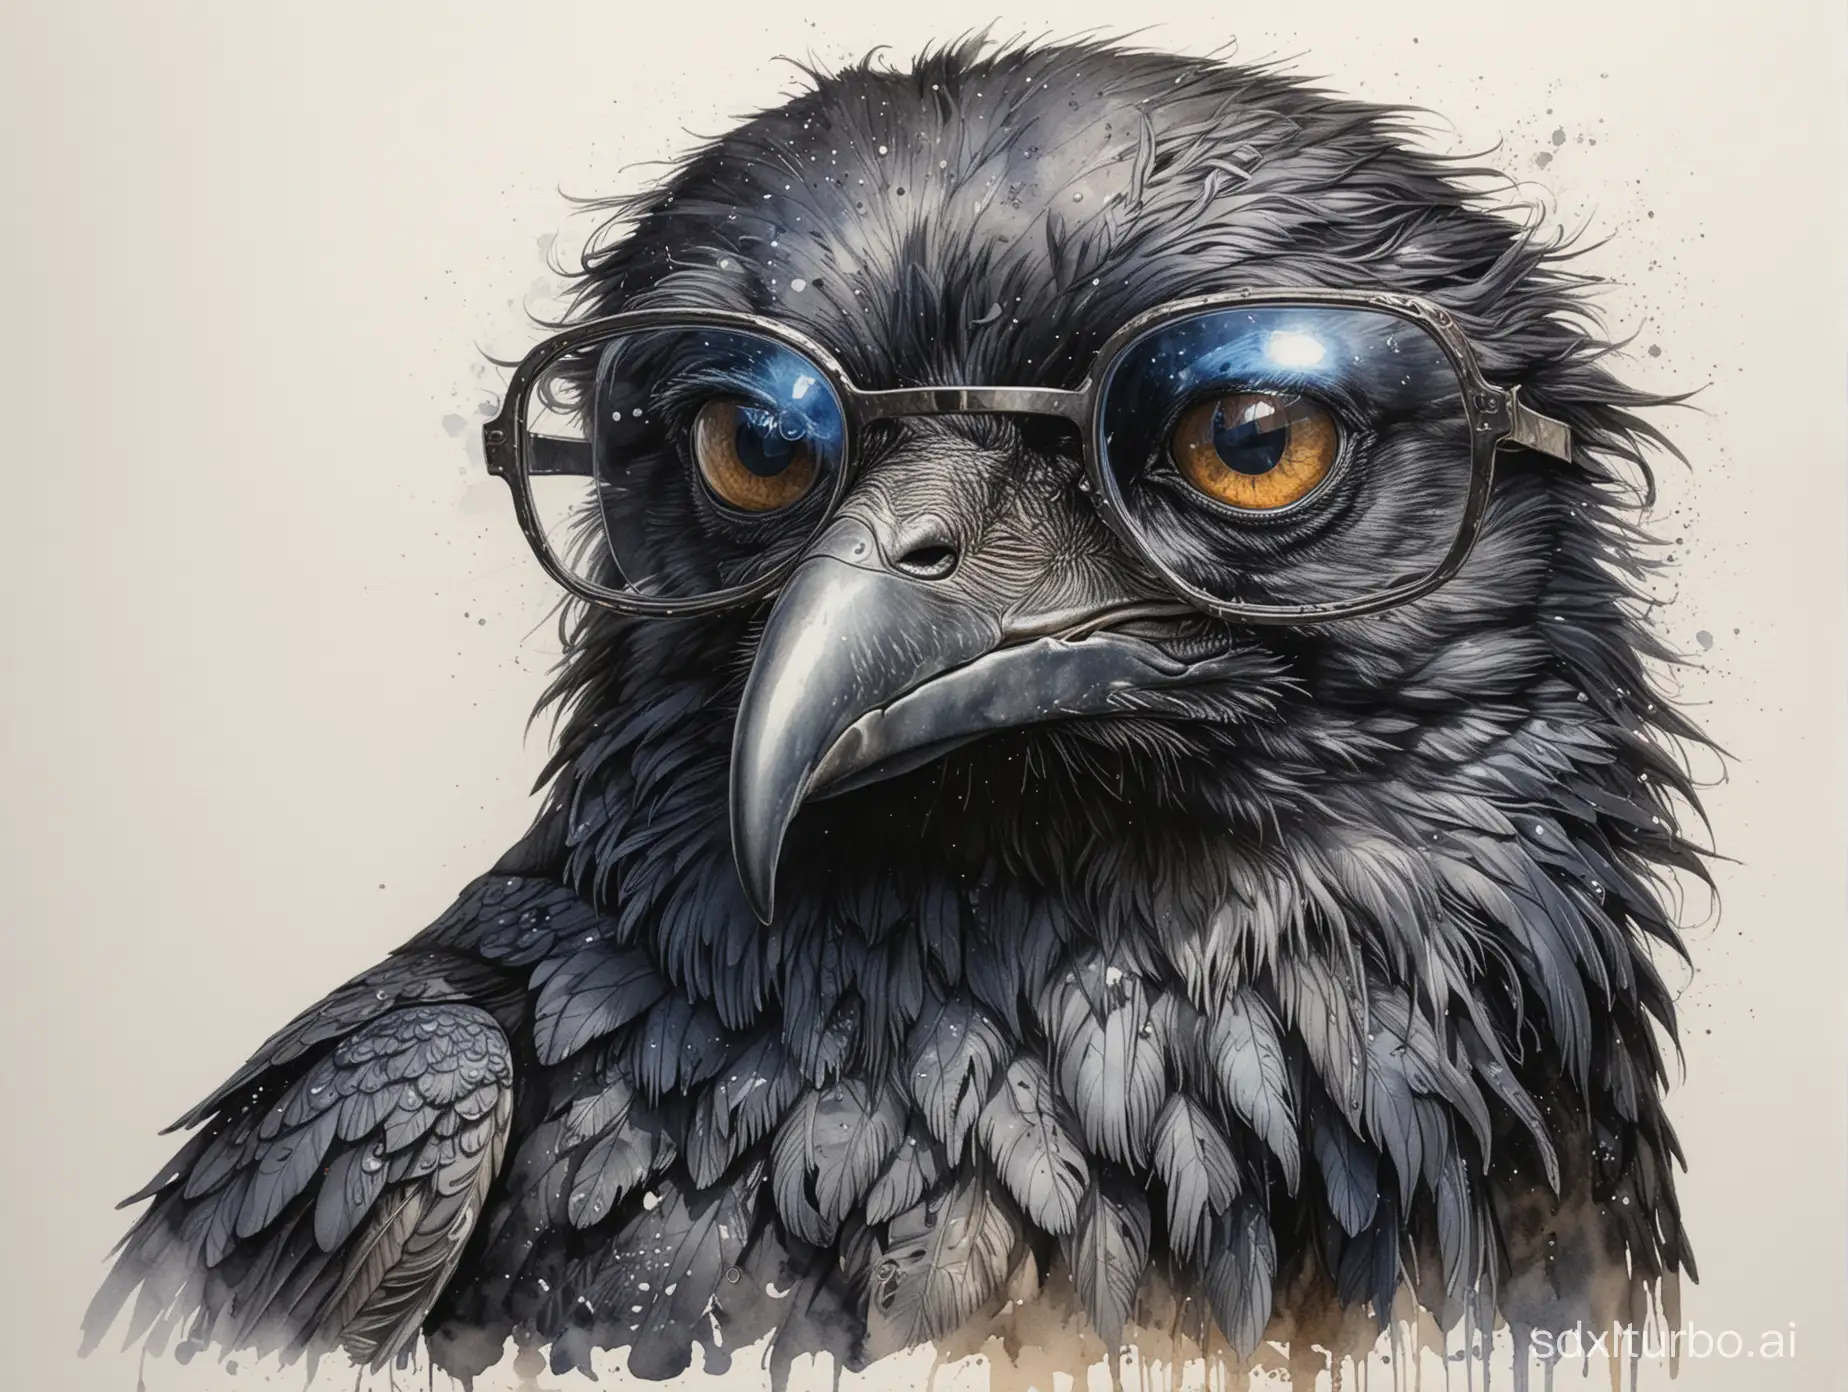 Detailed-Watercolor-Drawing-of-a-Disheveled-Raven-with-Eyeglasses